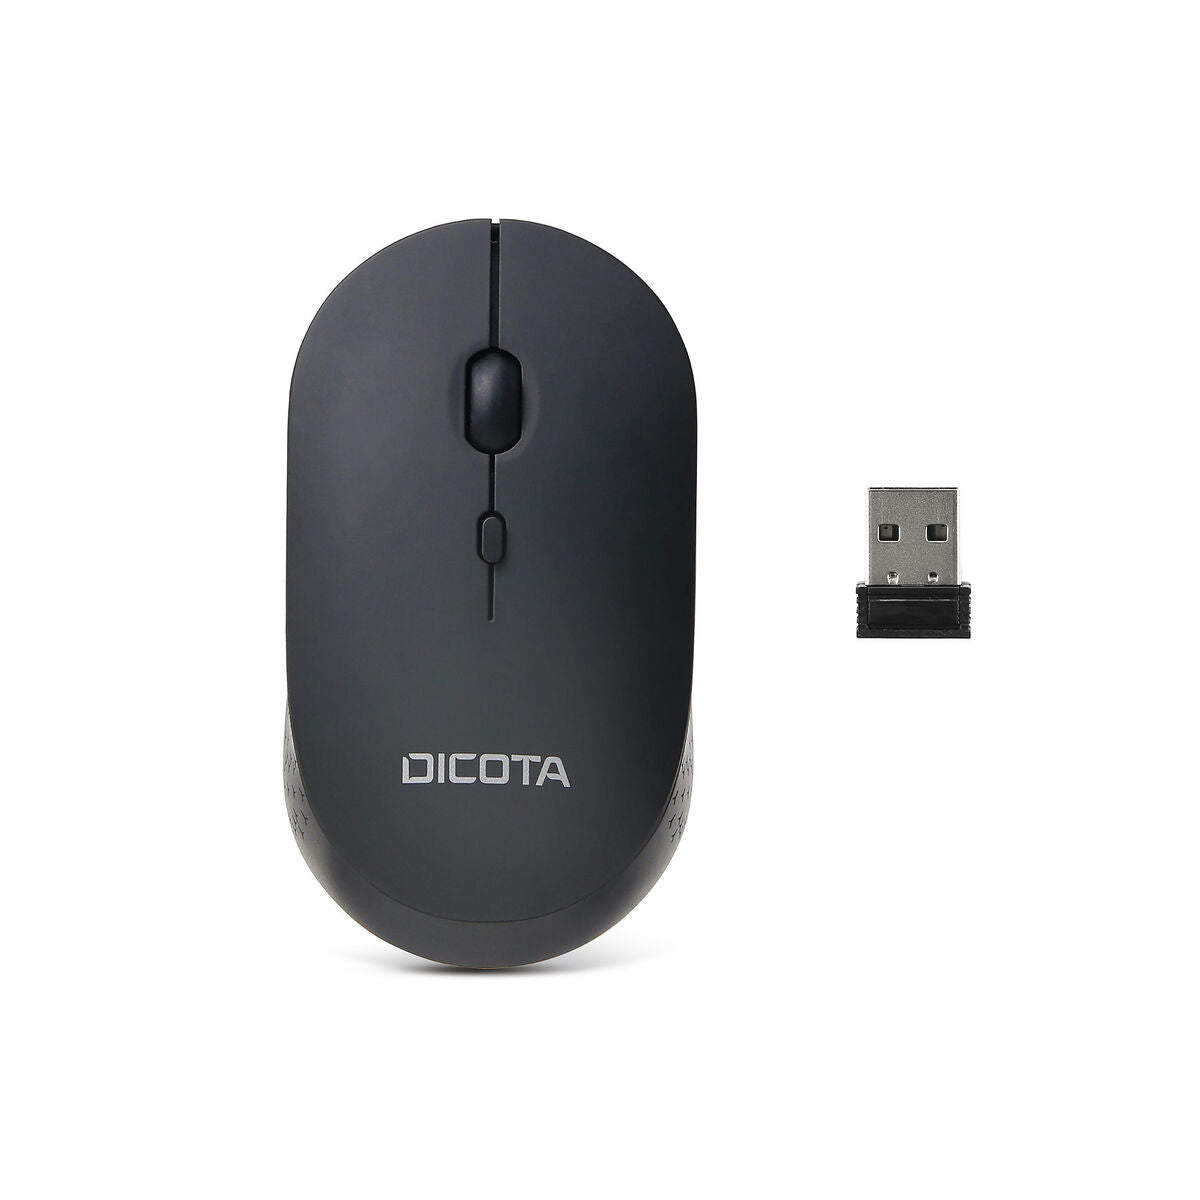 Optical Wireless Mouse Dicota SILENT V2 1600 dpi, Dicota, Computing, Accessories, optical-wireless-mouse-dicota-silent-v2-1600-dpi, Brand_Dicota, category-reference-2609, category-reference-2642, category-reference-2656, category-reference-t-19685, category-reference-t-19908, category-reference-t-21353, category-reference-t-25626, computers / peripherals, Condition_NEW, office, Price_20 - 50, Teleworking, RiotNook